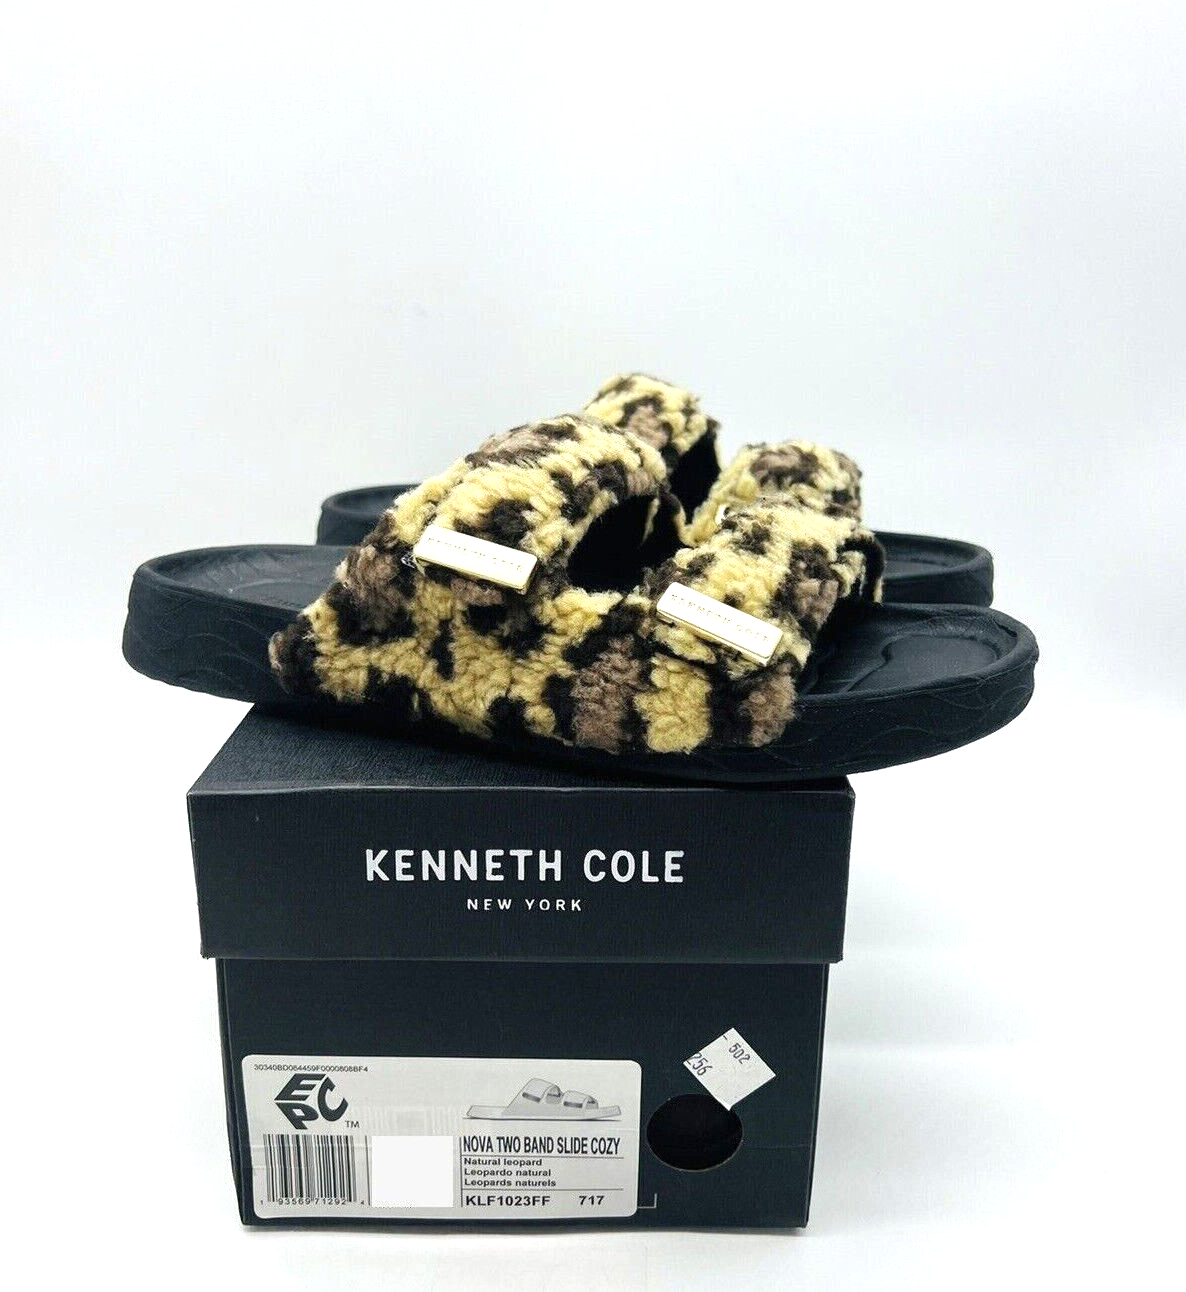 Primary image for Kenneth Cole New York Nova Two Band Cozy Slide Sandals - Natural Leopard, US 8M